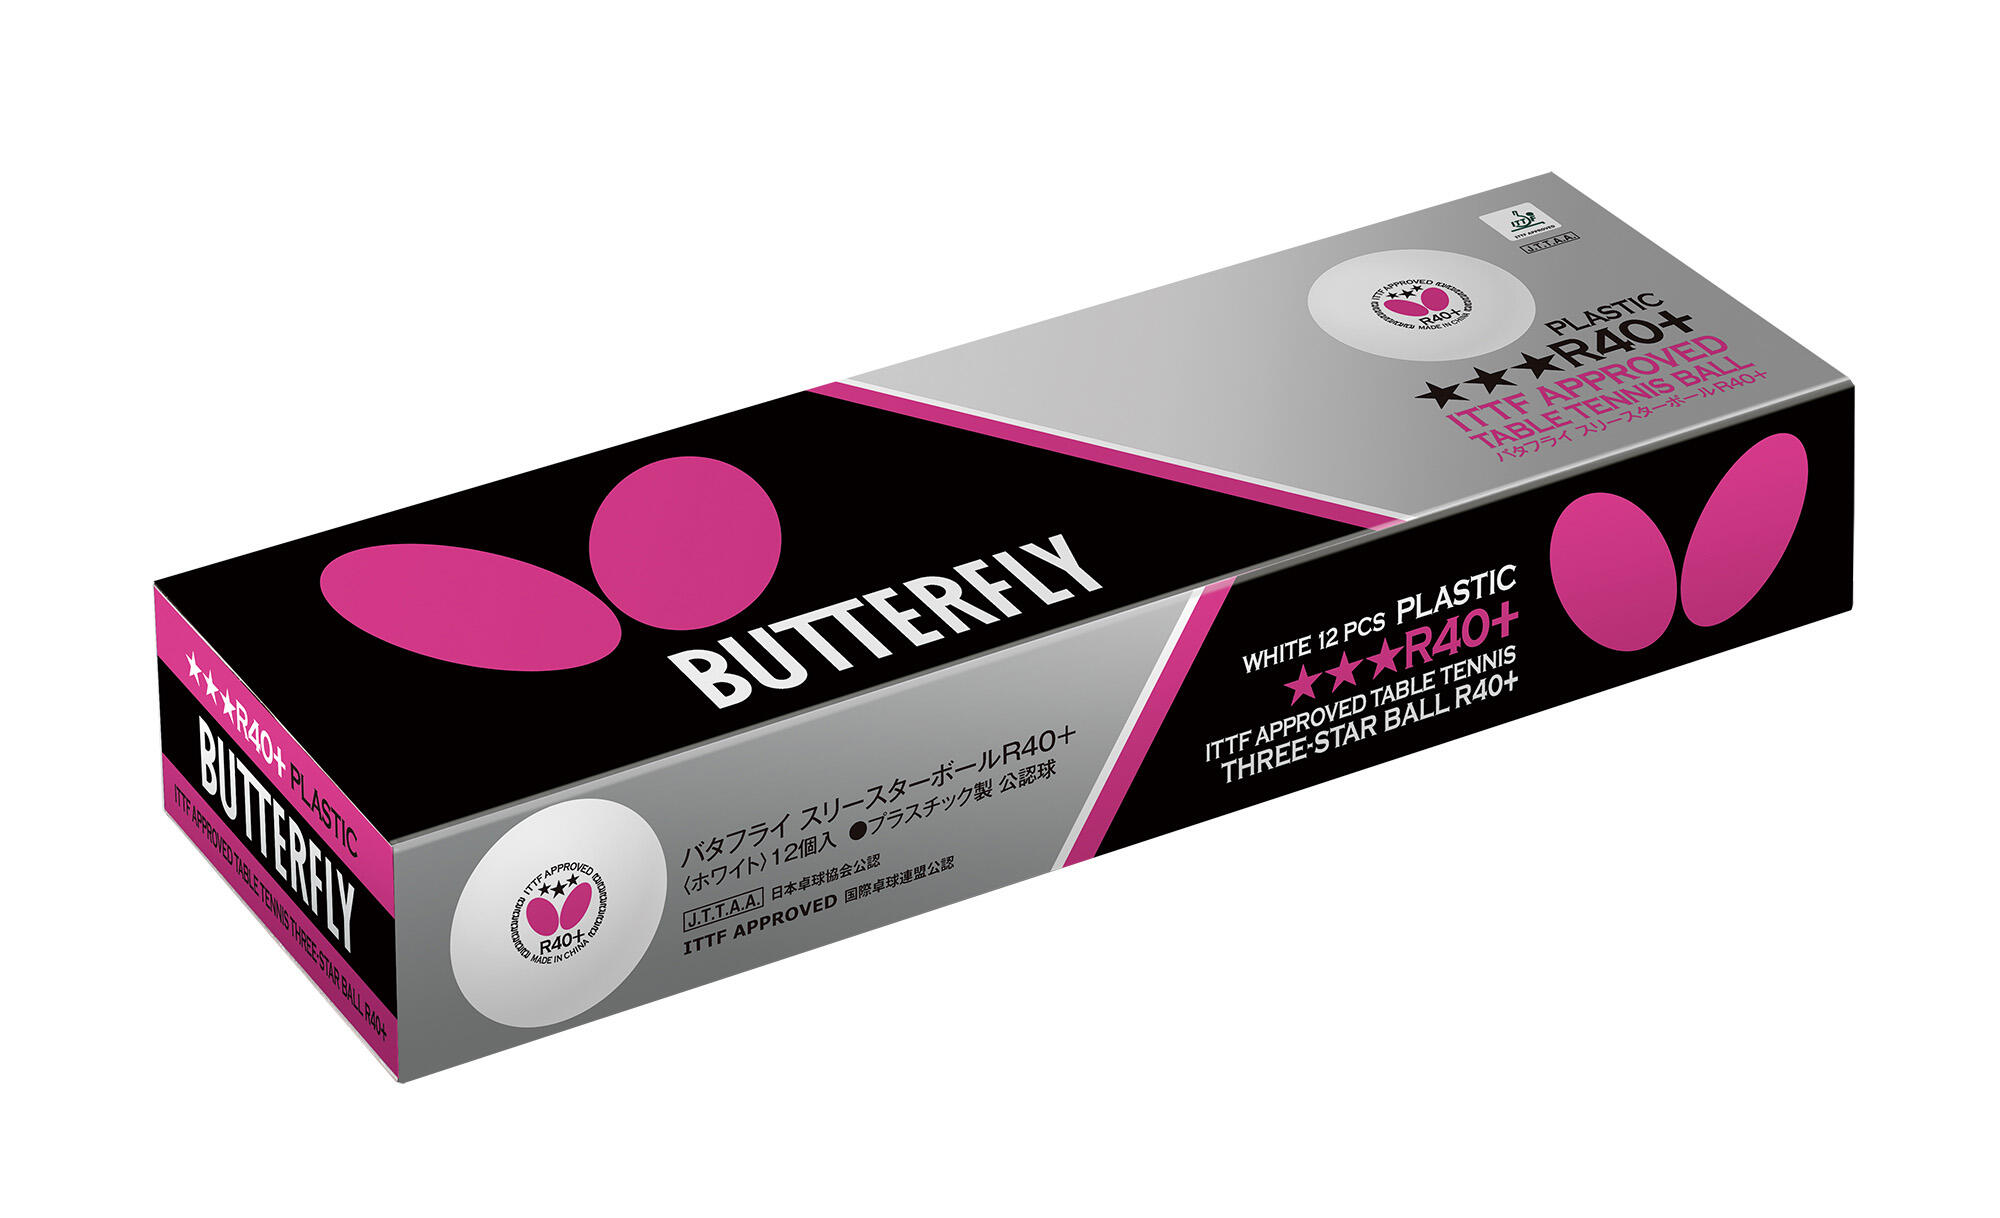 Butterfly R40+ Three Star Ball (Pack of 12) 1/4